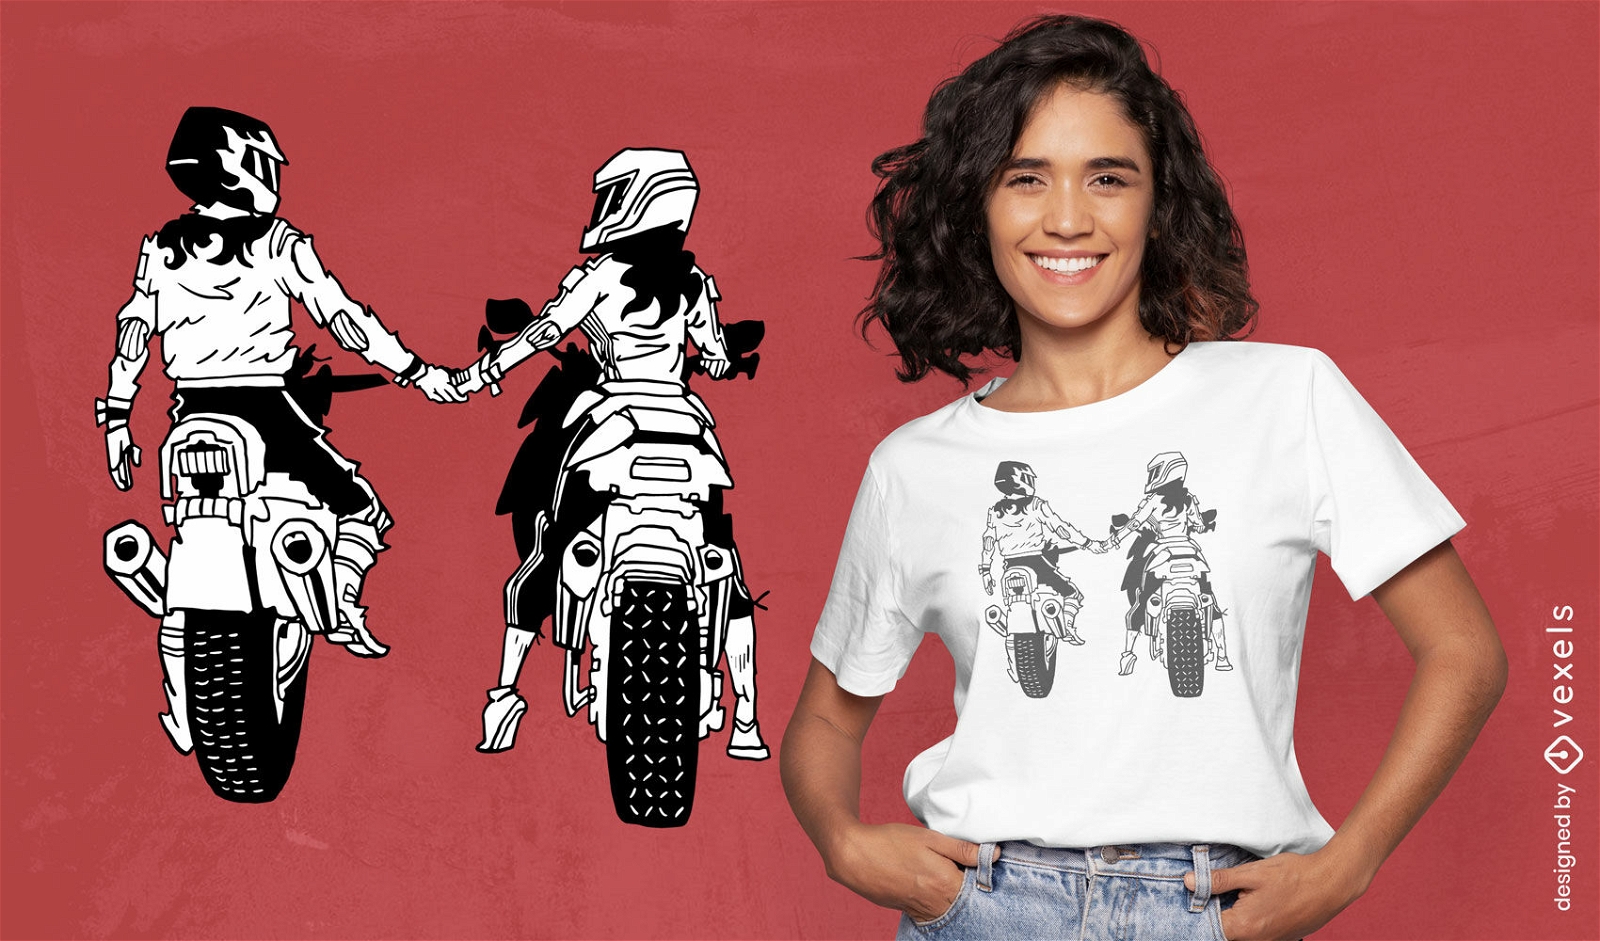 Motorcycle couple holding hands t-shirt design